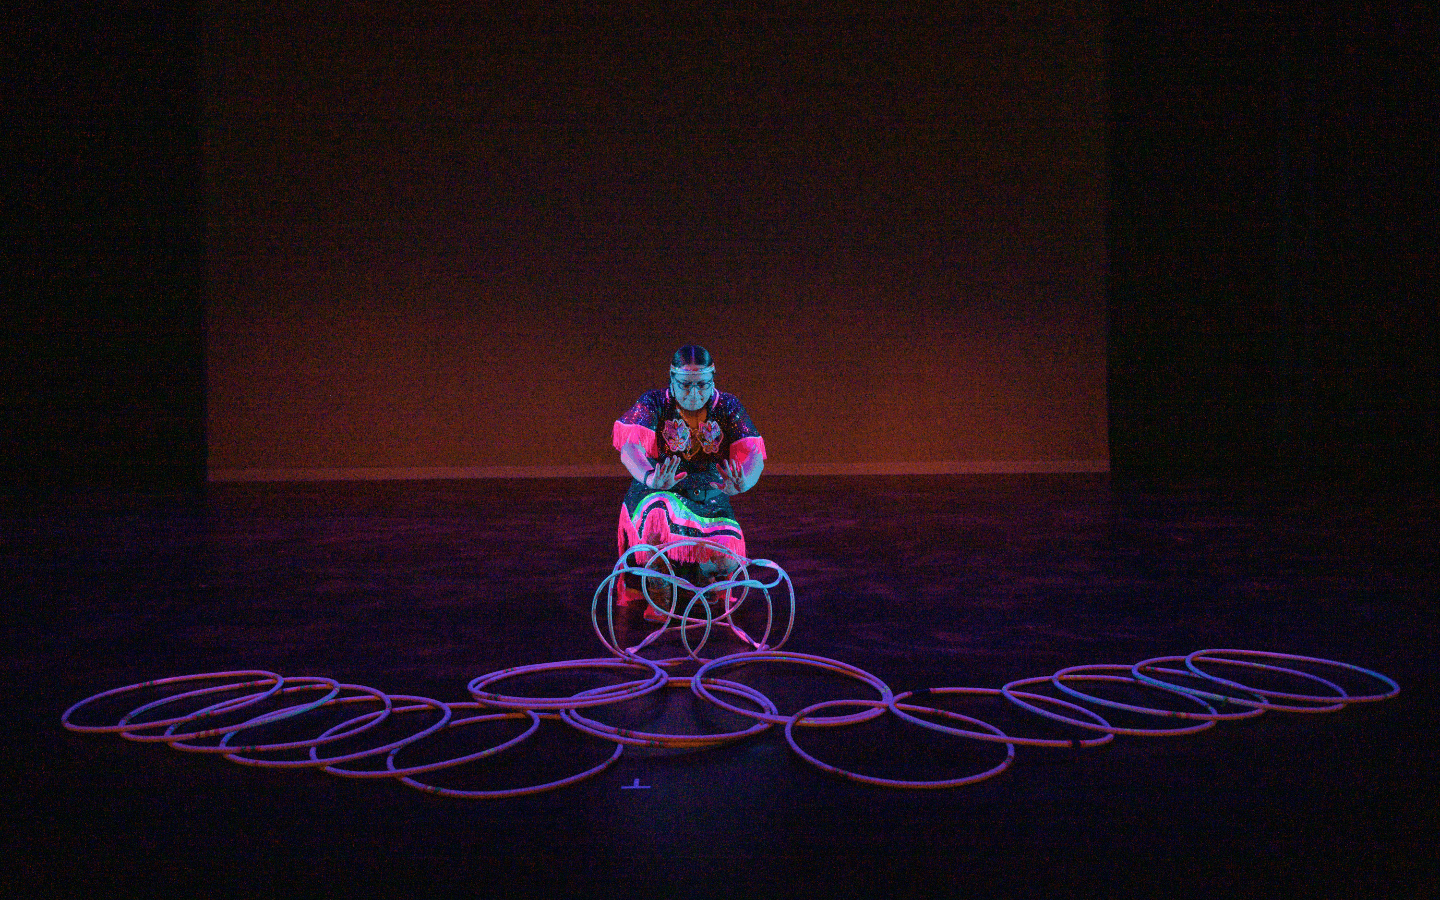 An Indigenous female dancer in traditional regalia crouching on stage with glowing hoops placed in front of her.